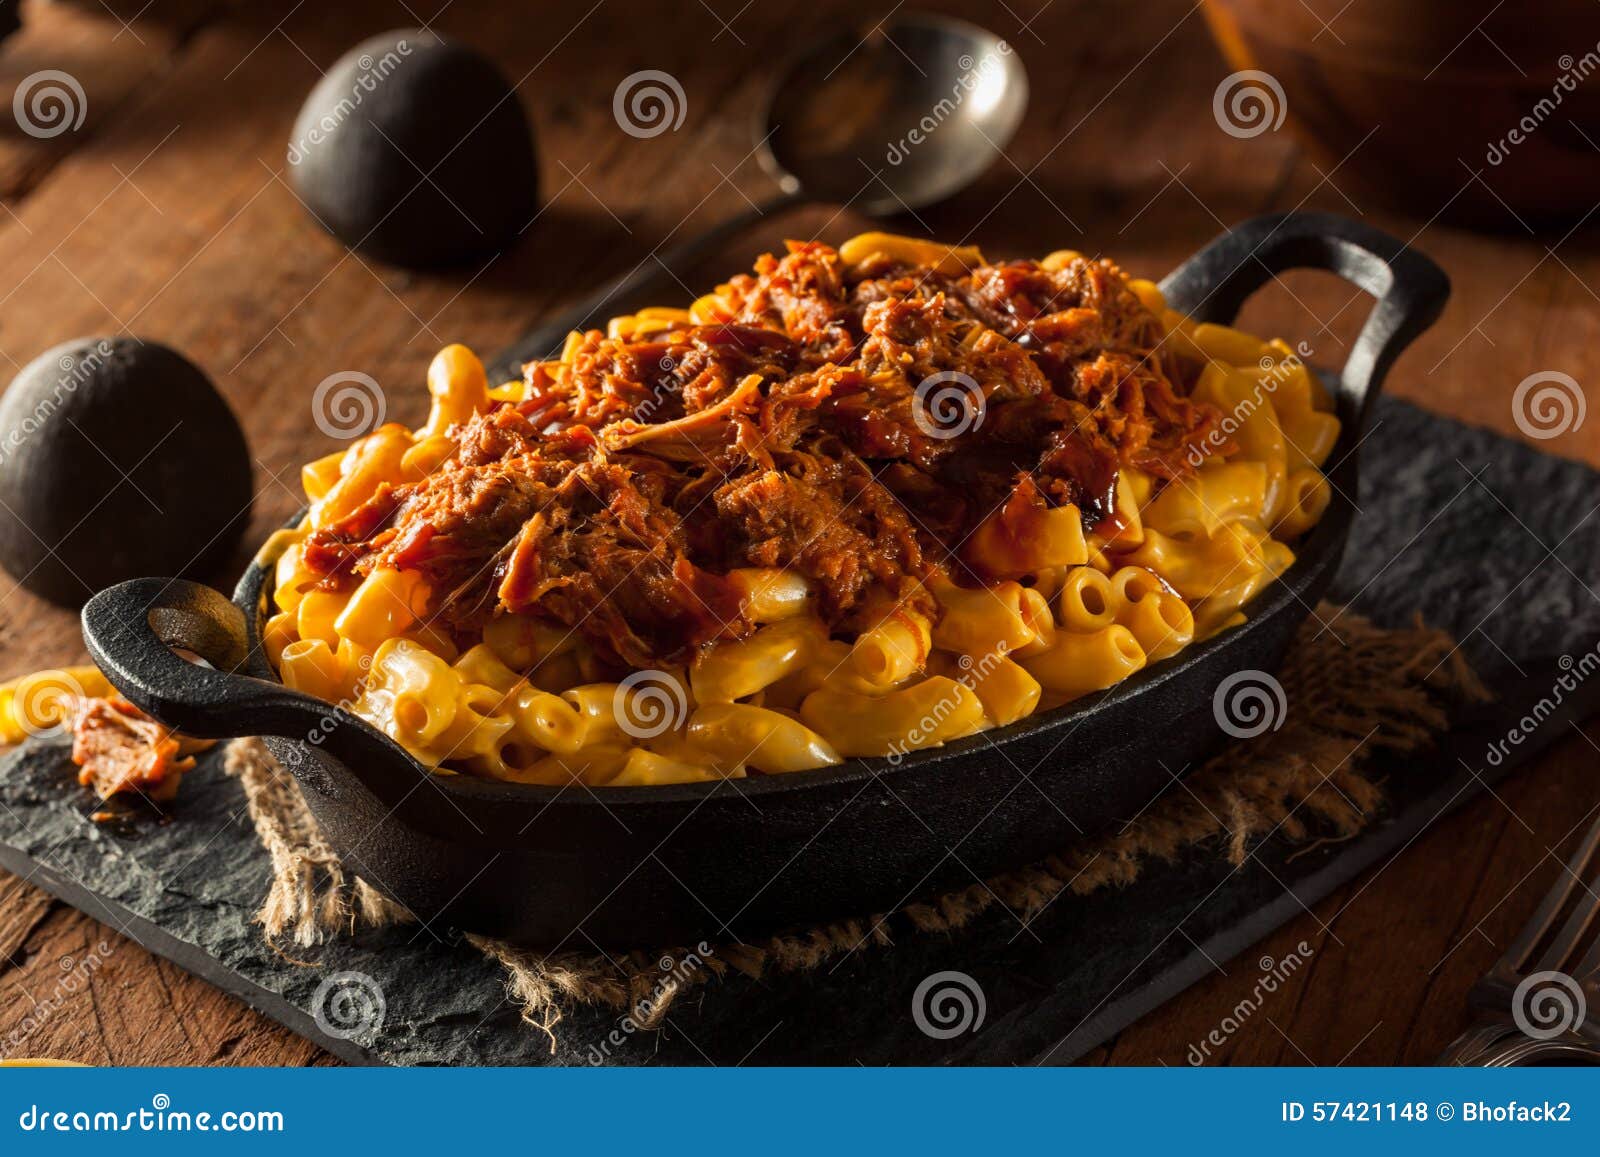 homemade bbq pulled pork mac and cheese